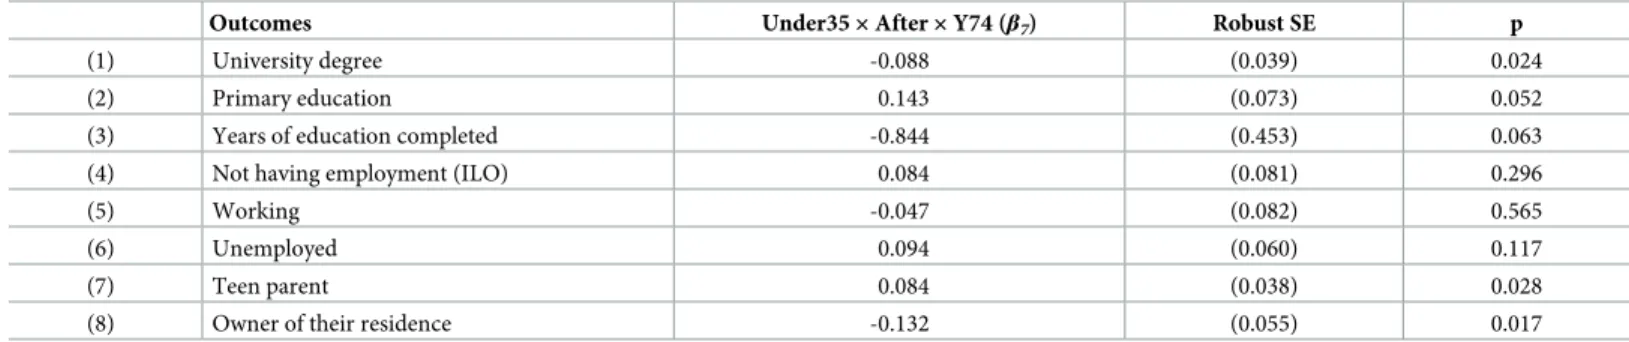 Table 2 shows these results. In general, the size of the estimated coefficients is similar to the main results in Table 1, but coefficients on the labor market outcomes are estimated with greater uncertainty